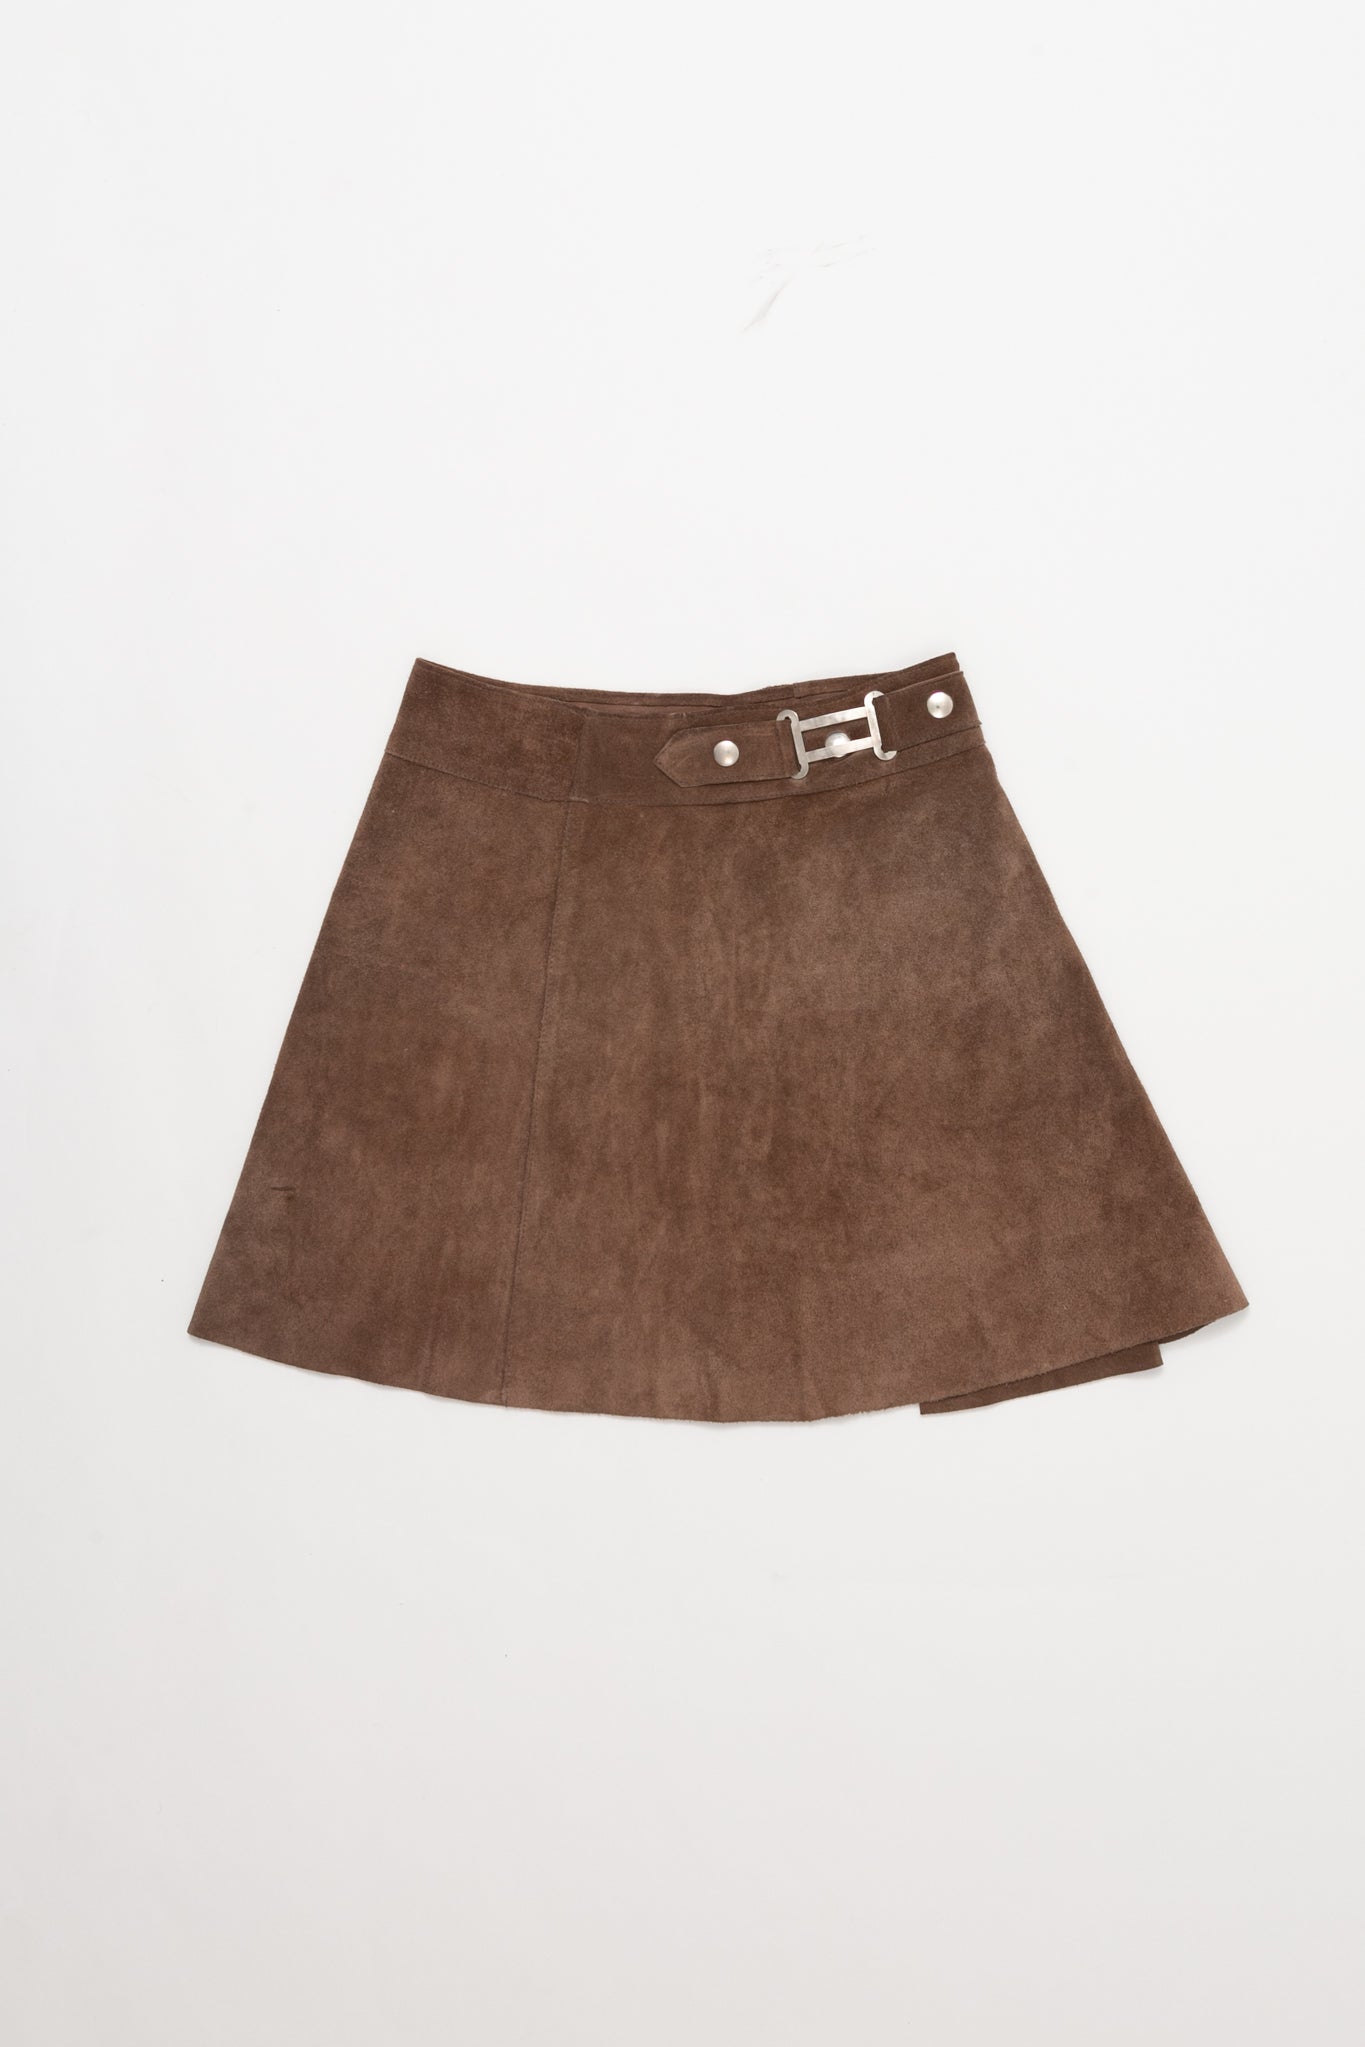 Washed Brown Suede Skirt